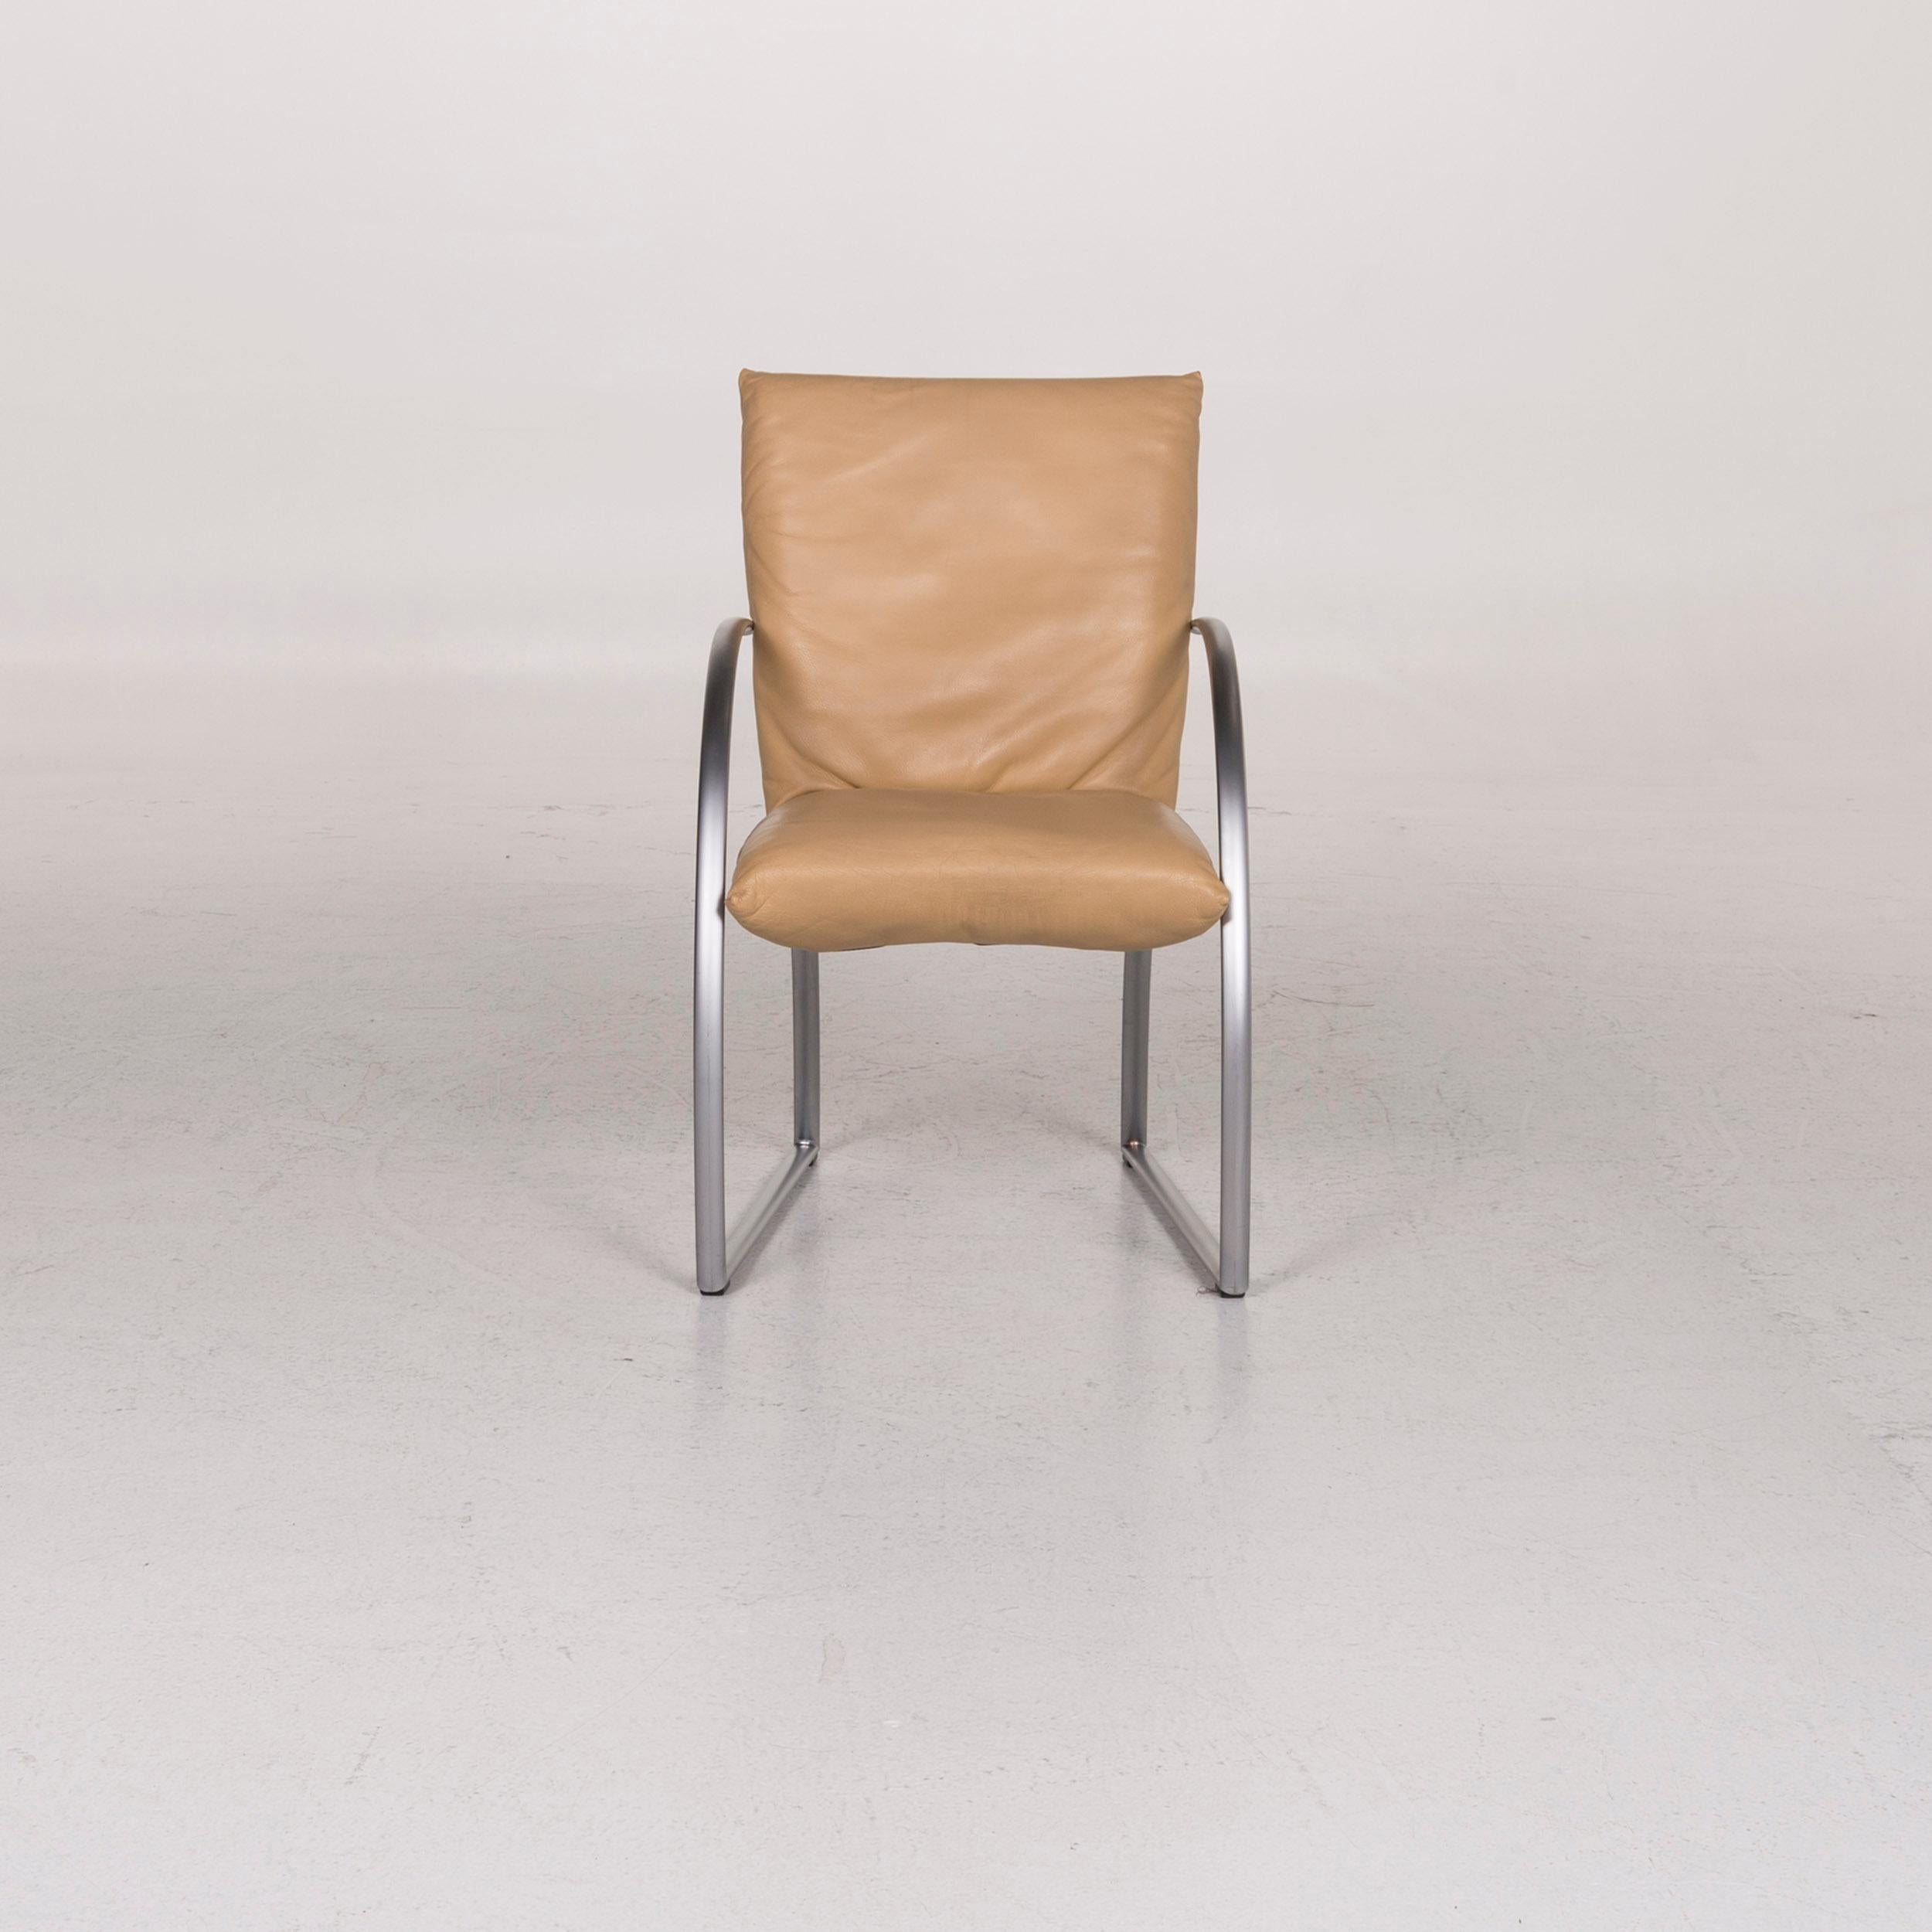 We bring to you a Rolf Benz 7600 leather chair beige armchair.
 

 Product measurements in centimeters:
 

Depth 66
Width 54
Height 90
Seat-height 48
Rest-height 65
Seat-depth 46
Seat-width 49
Back-height 43.
 